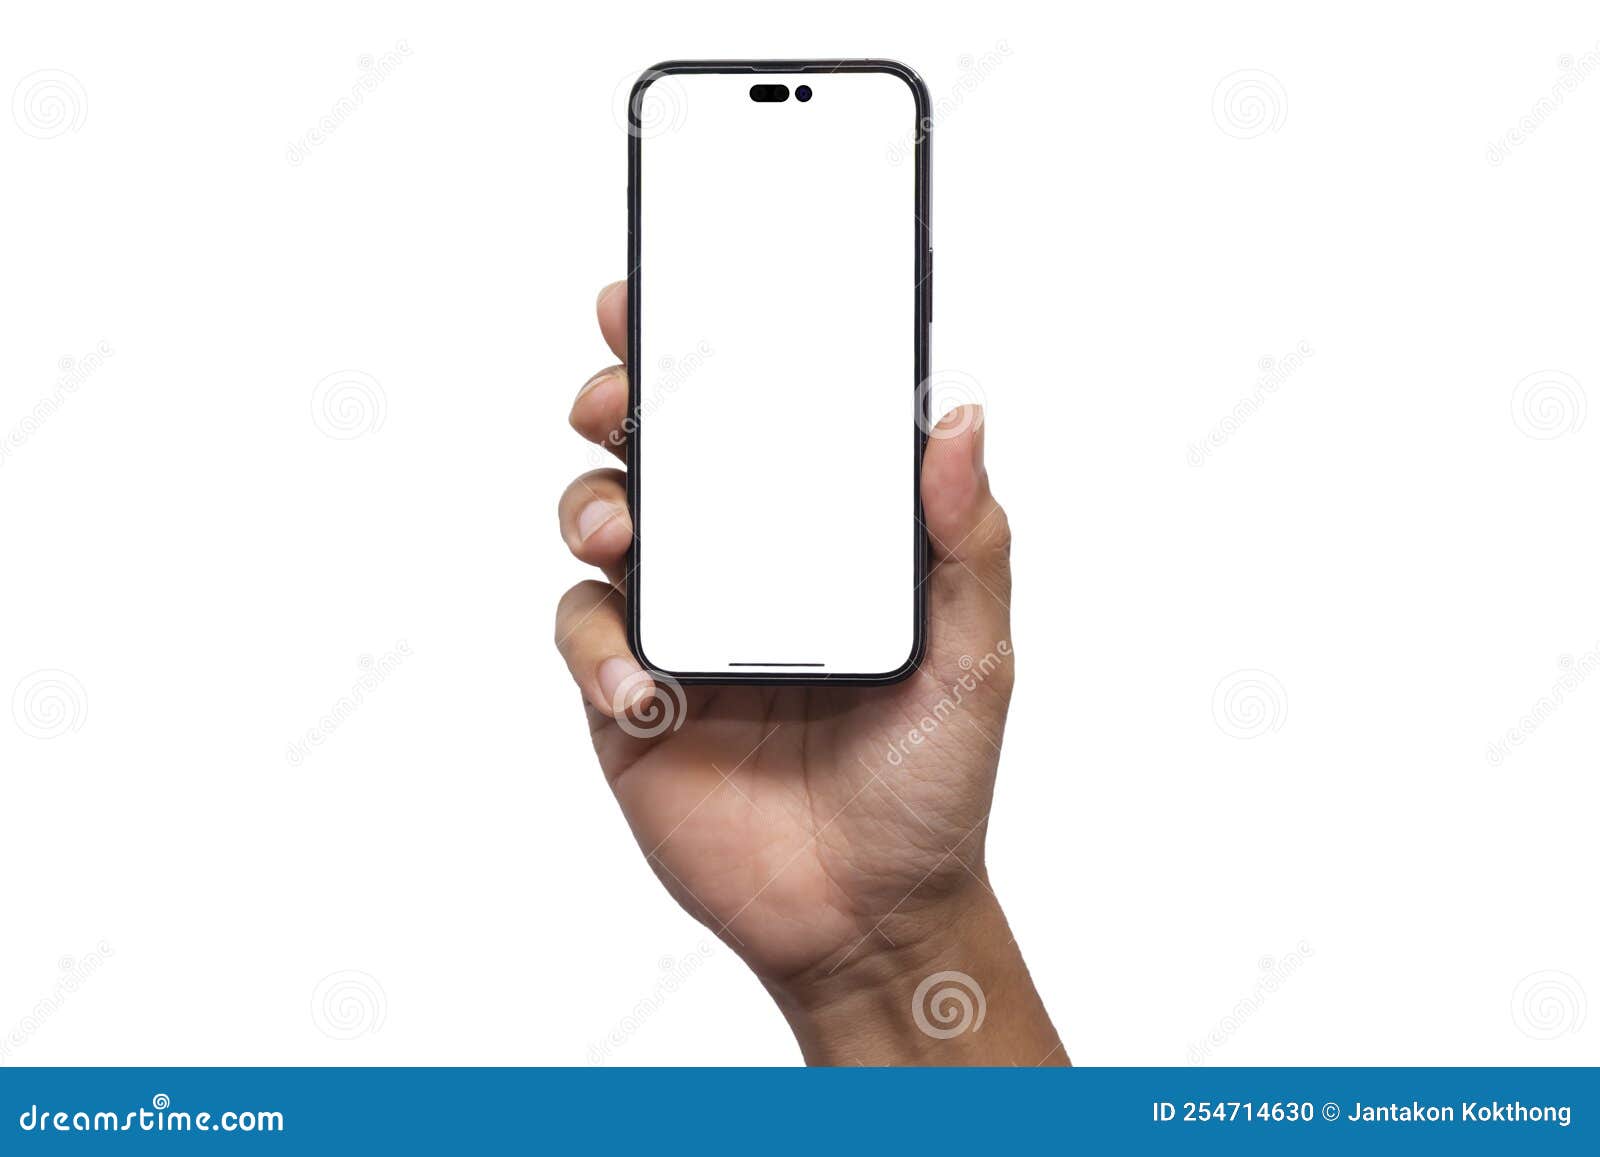 mockup iphone 14 pro max and new iphon mini. mock up screen iphone x . transparent and clipping path 